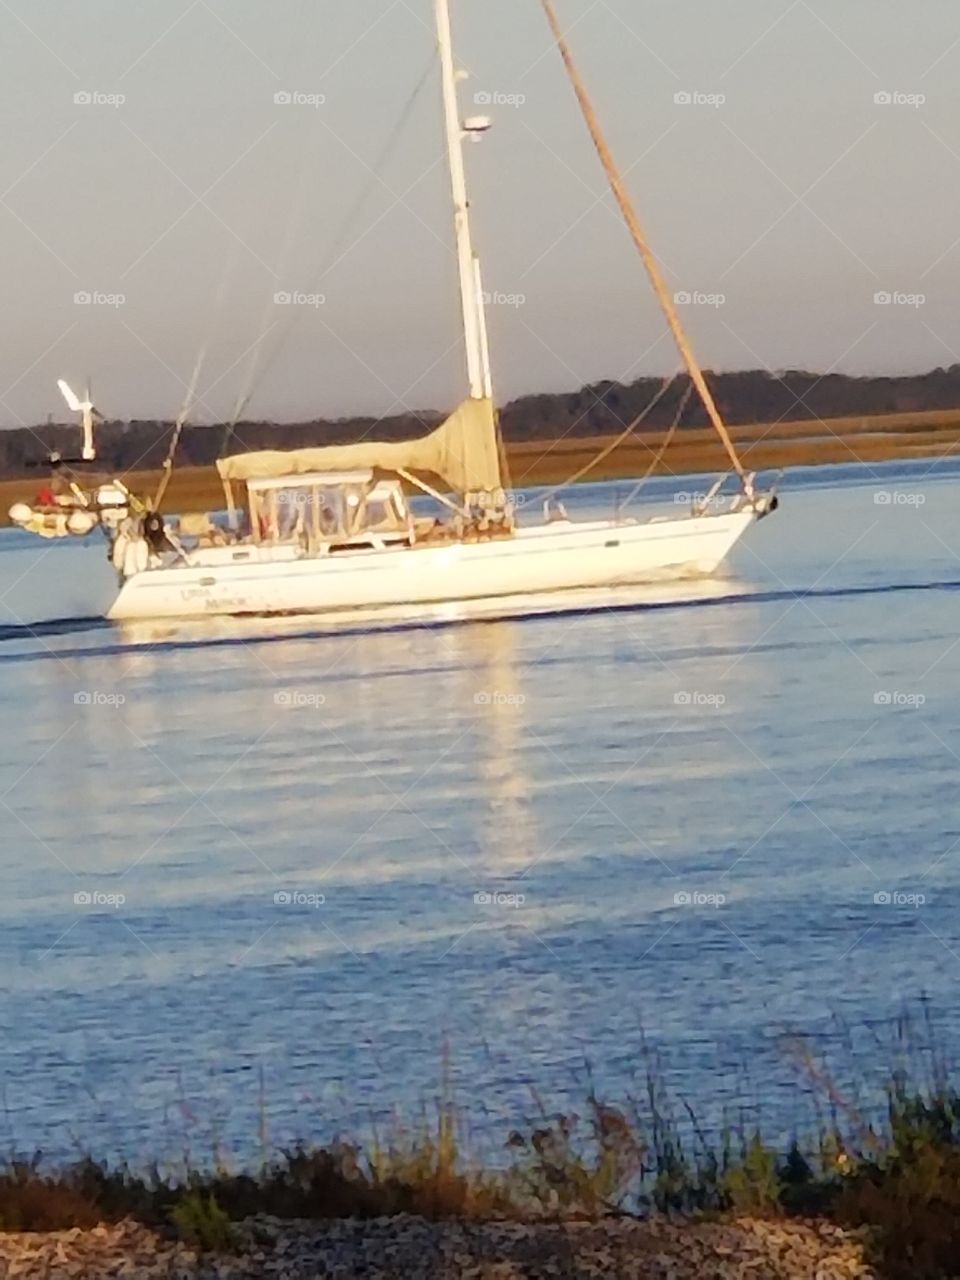 shot of a passing boat